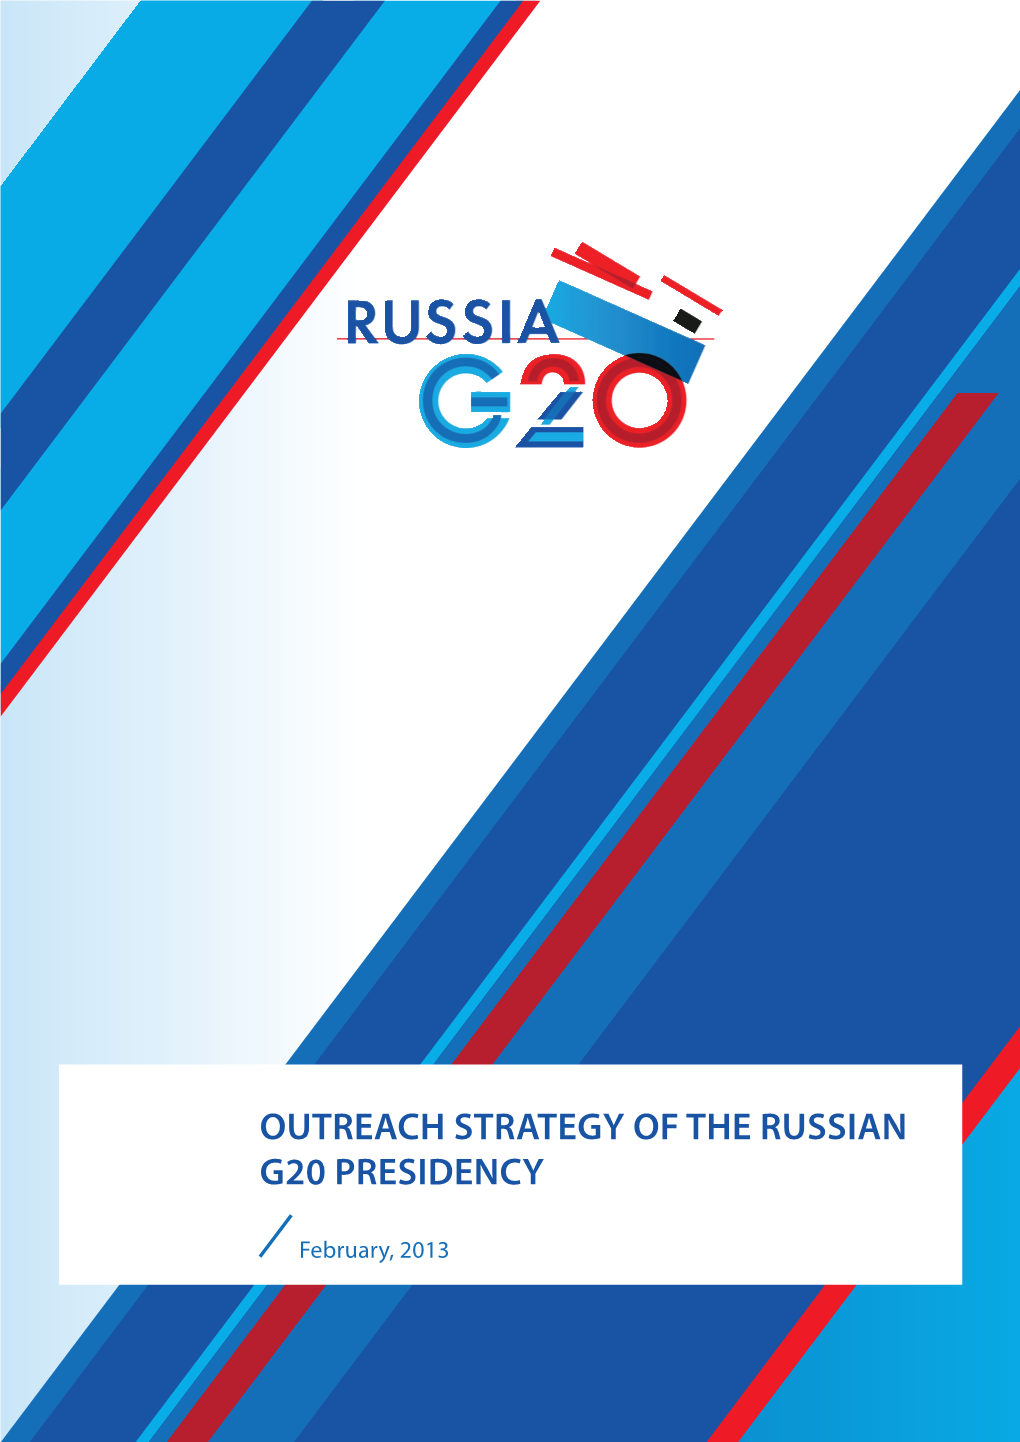 Outreach Strategy of the Russian G20 Presidency